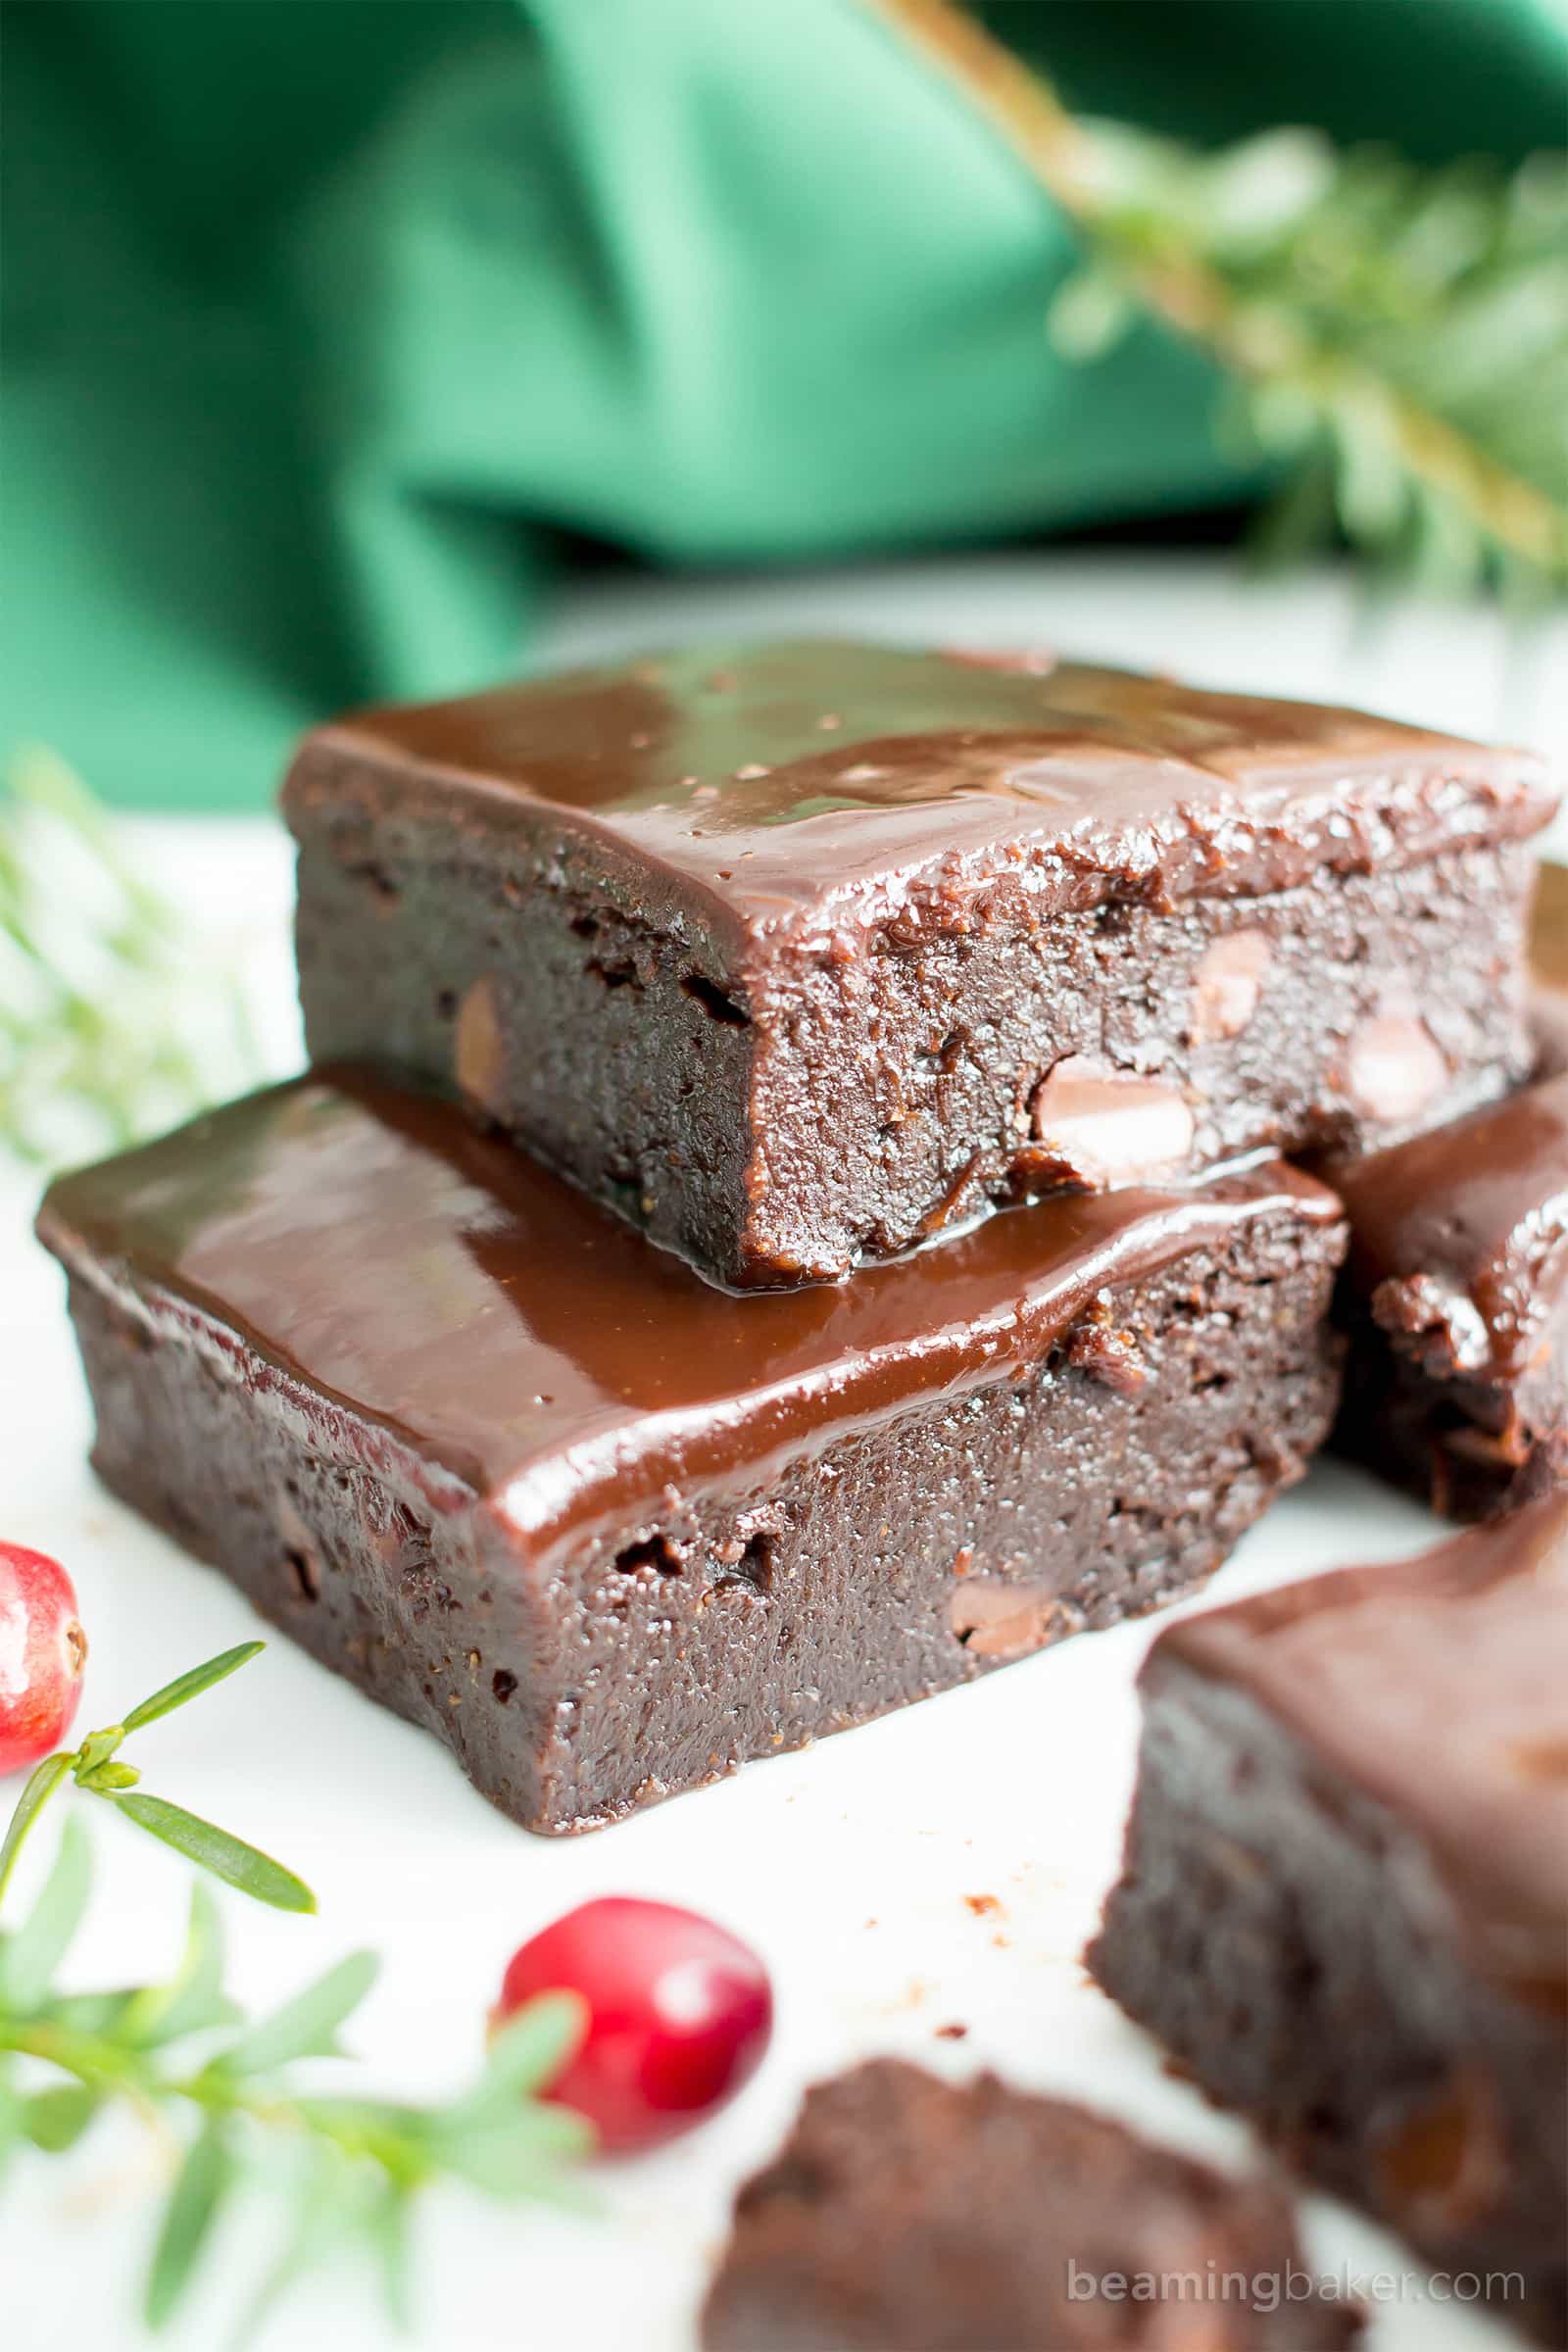 Moist & Fudgy Ganache Peppermint Brownies Recipe (V, GF): an easy recipe for indulgently fudgy, cool mint brownies topped with silky smooth chocolate ganache made with healthy ingredients. #Vegan #GlutenFree #DairyFree #HealthyHolidayDesserts #Desserts | Recipe on BeamingBaker.com